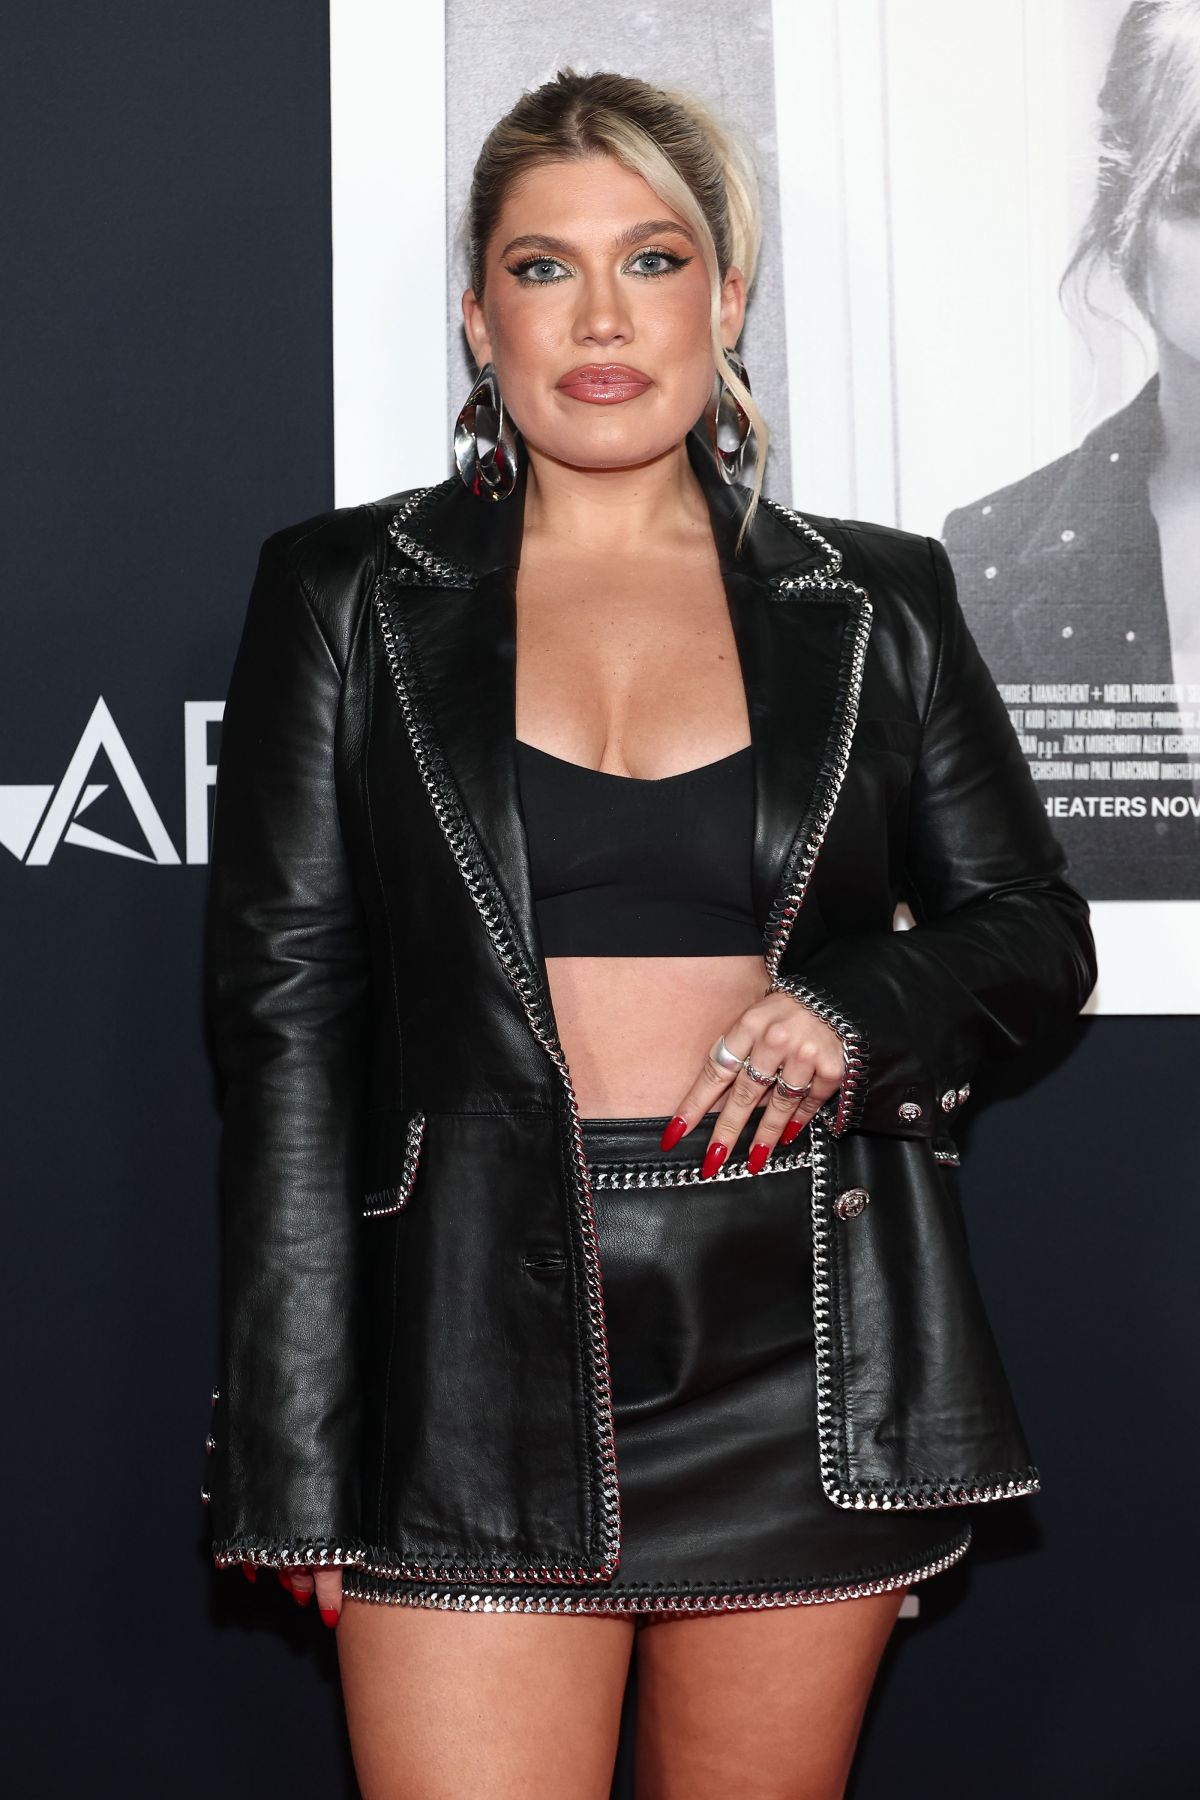 Robyn DelMonte at Selena Gomez: My Mind and Me Premiere in Hollywood, Nov 2022